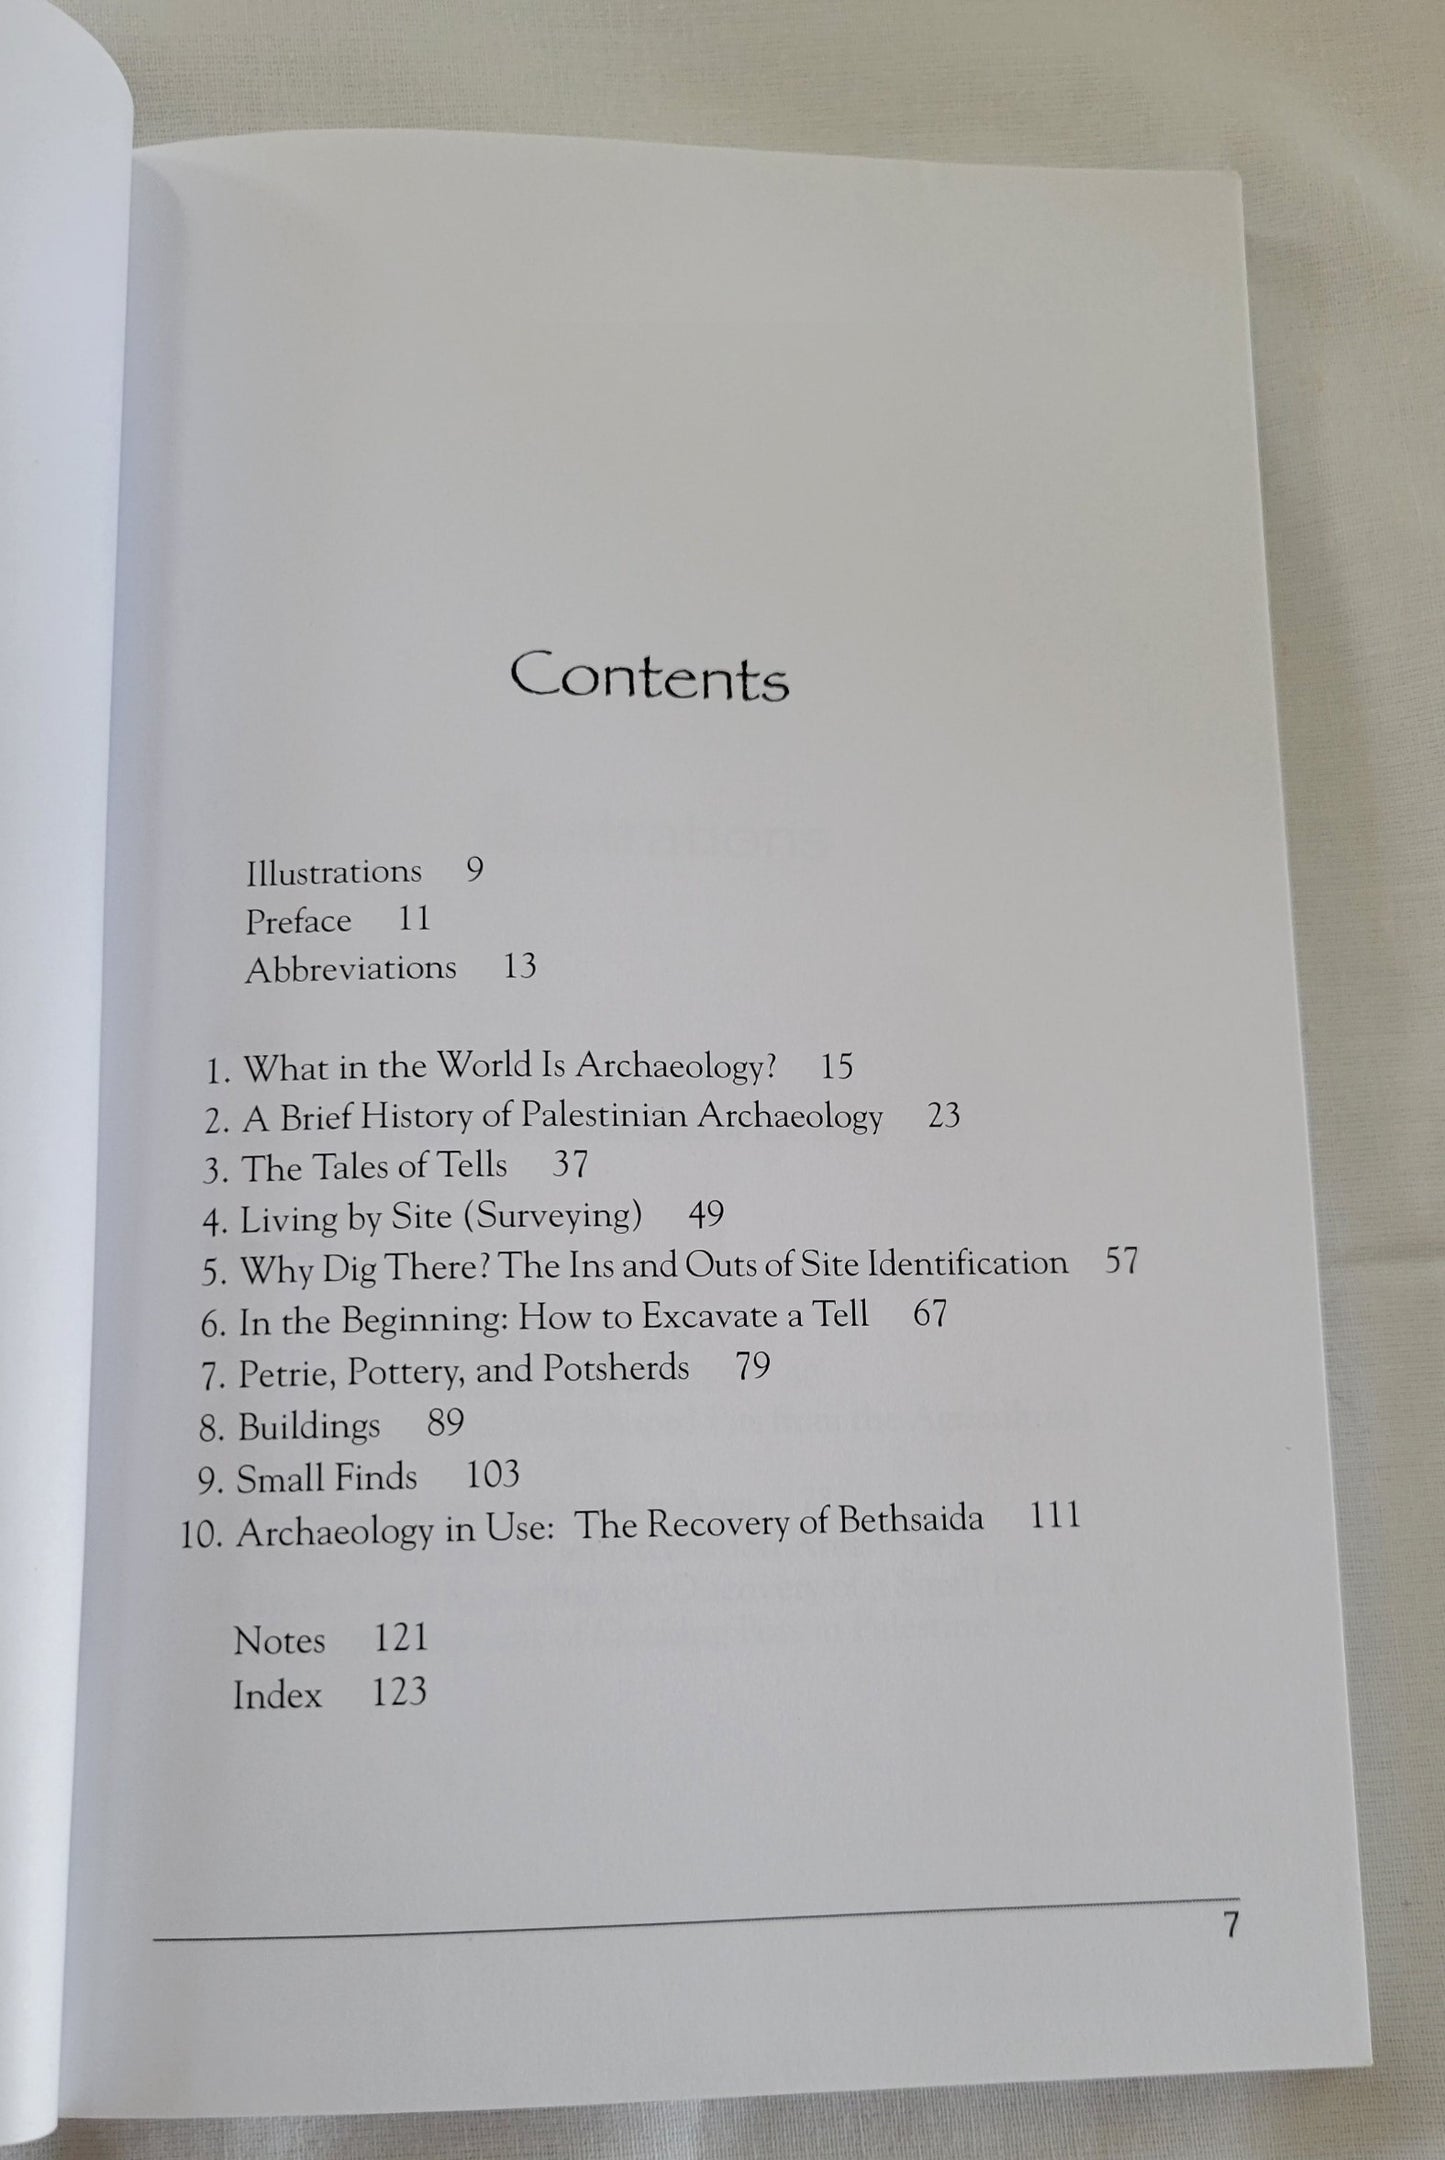 Used book “Doing Archaeology in the Land of the Bible: A Basic Guide” Written by John D. Currid. "A popular introduction to archaeology and the methods archaeologists use to reconstruct the history of ancient Israel." View of table of contents.